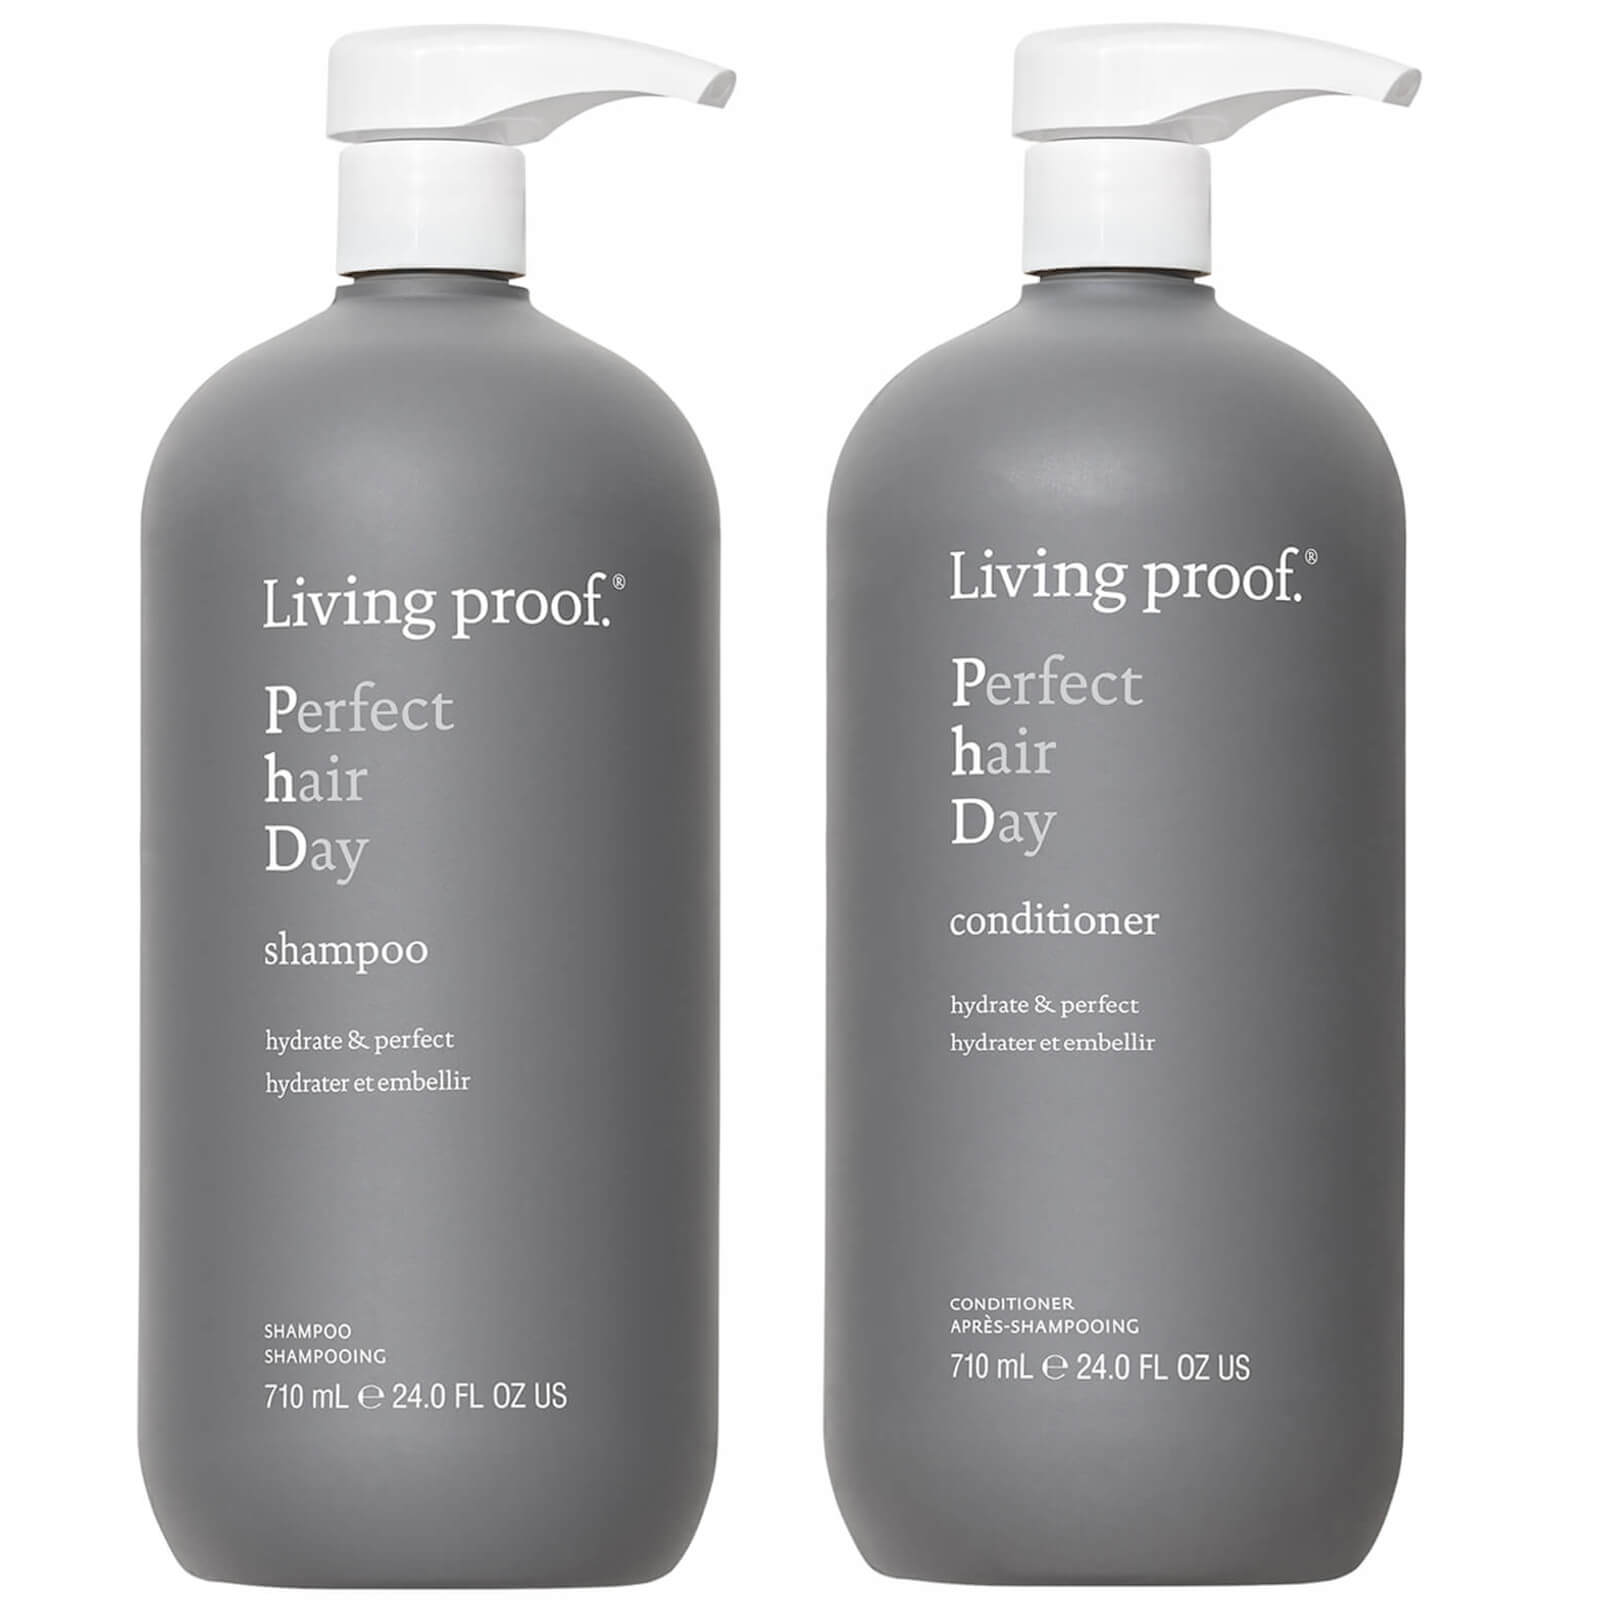 Living Proof Phd Shampoo And Conditioner Jumbo Duo In White